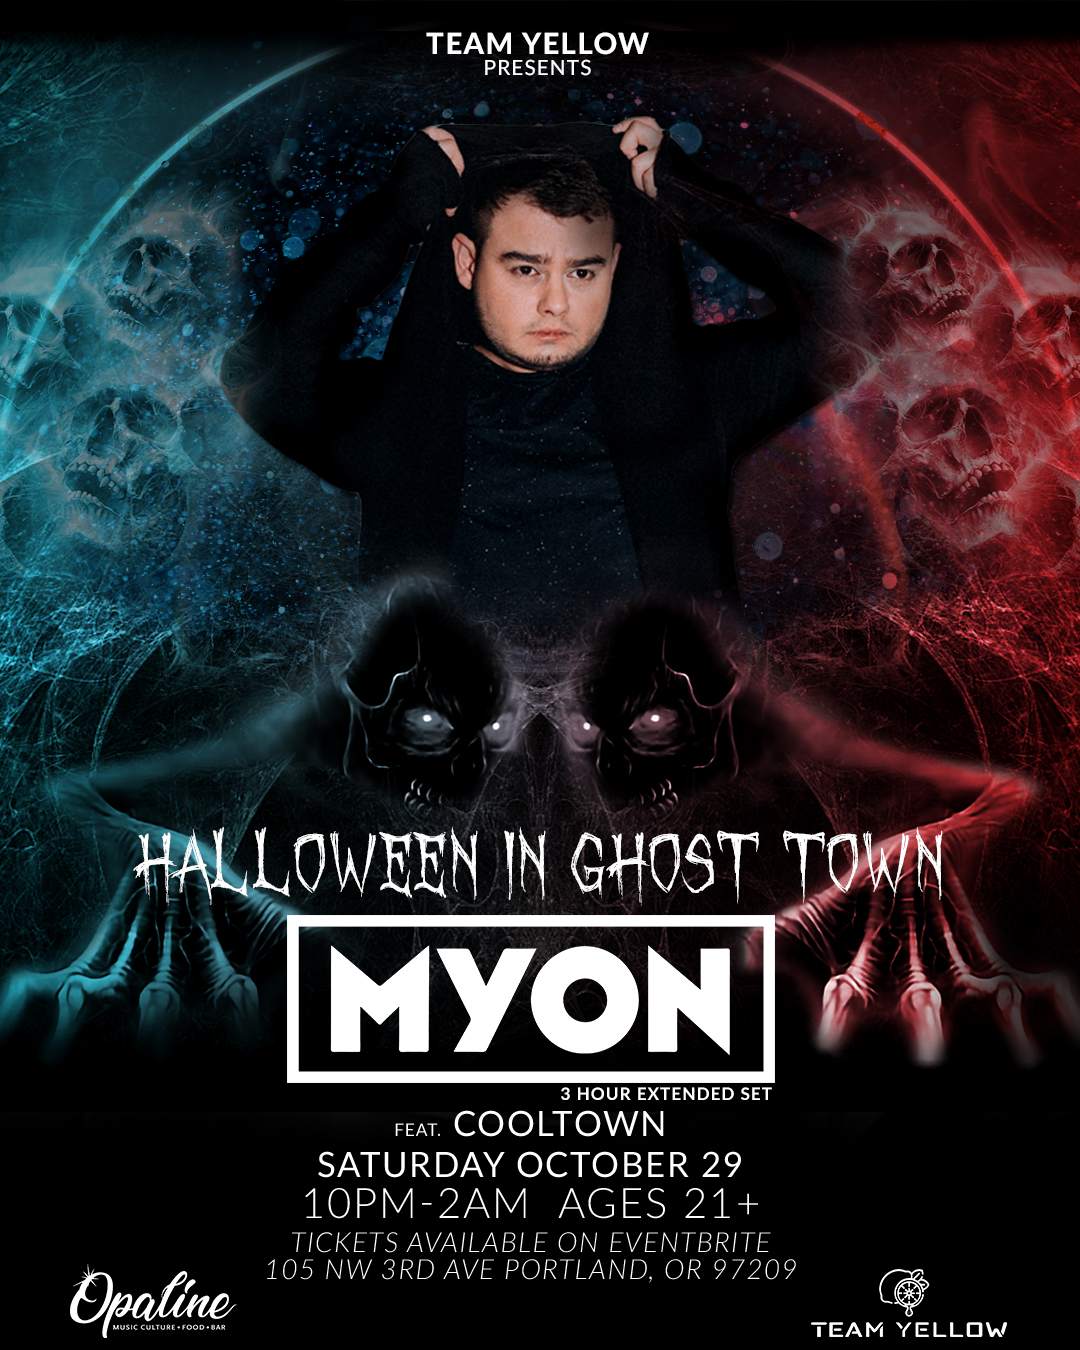 Halloween In Ghost Town with Myon (3 Hour Extended Set) Feat. Cooltown - Página frontal